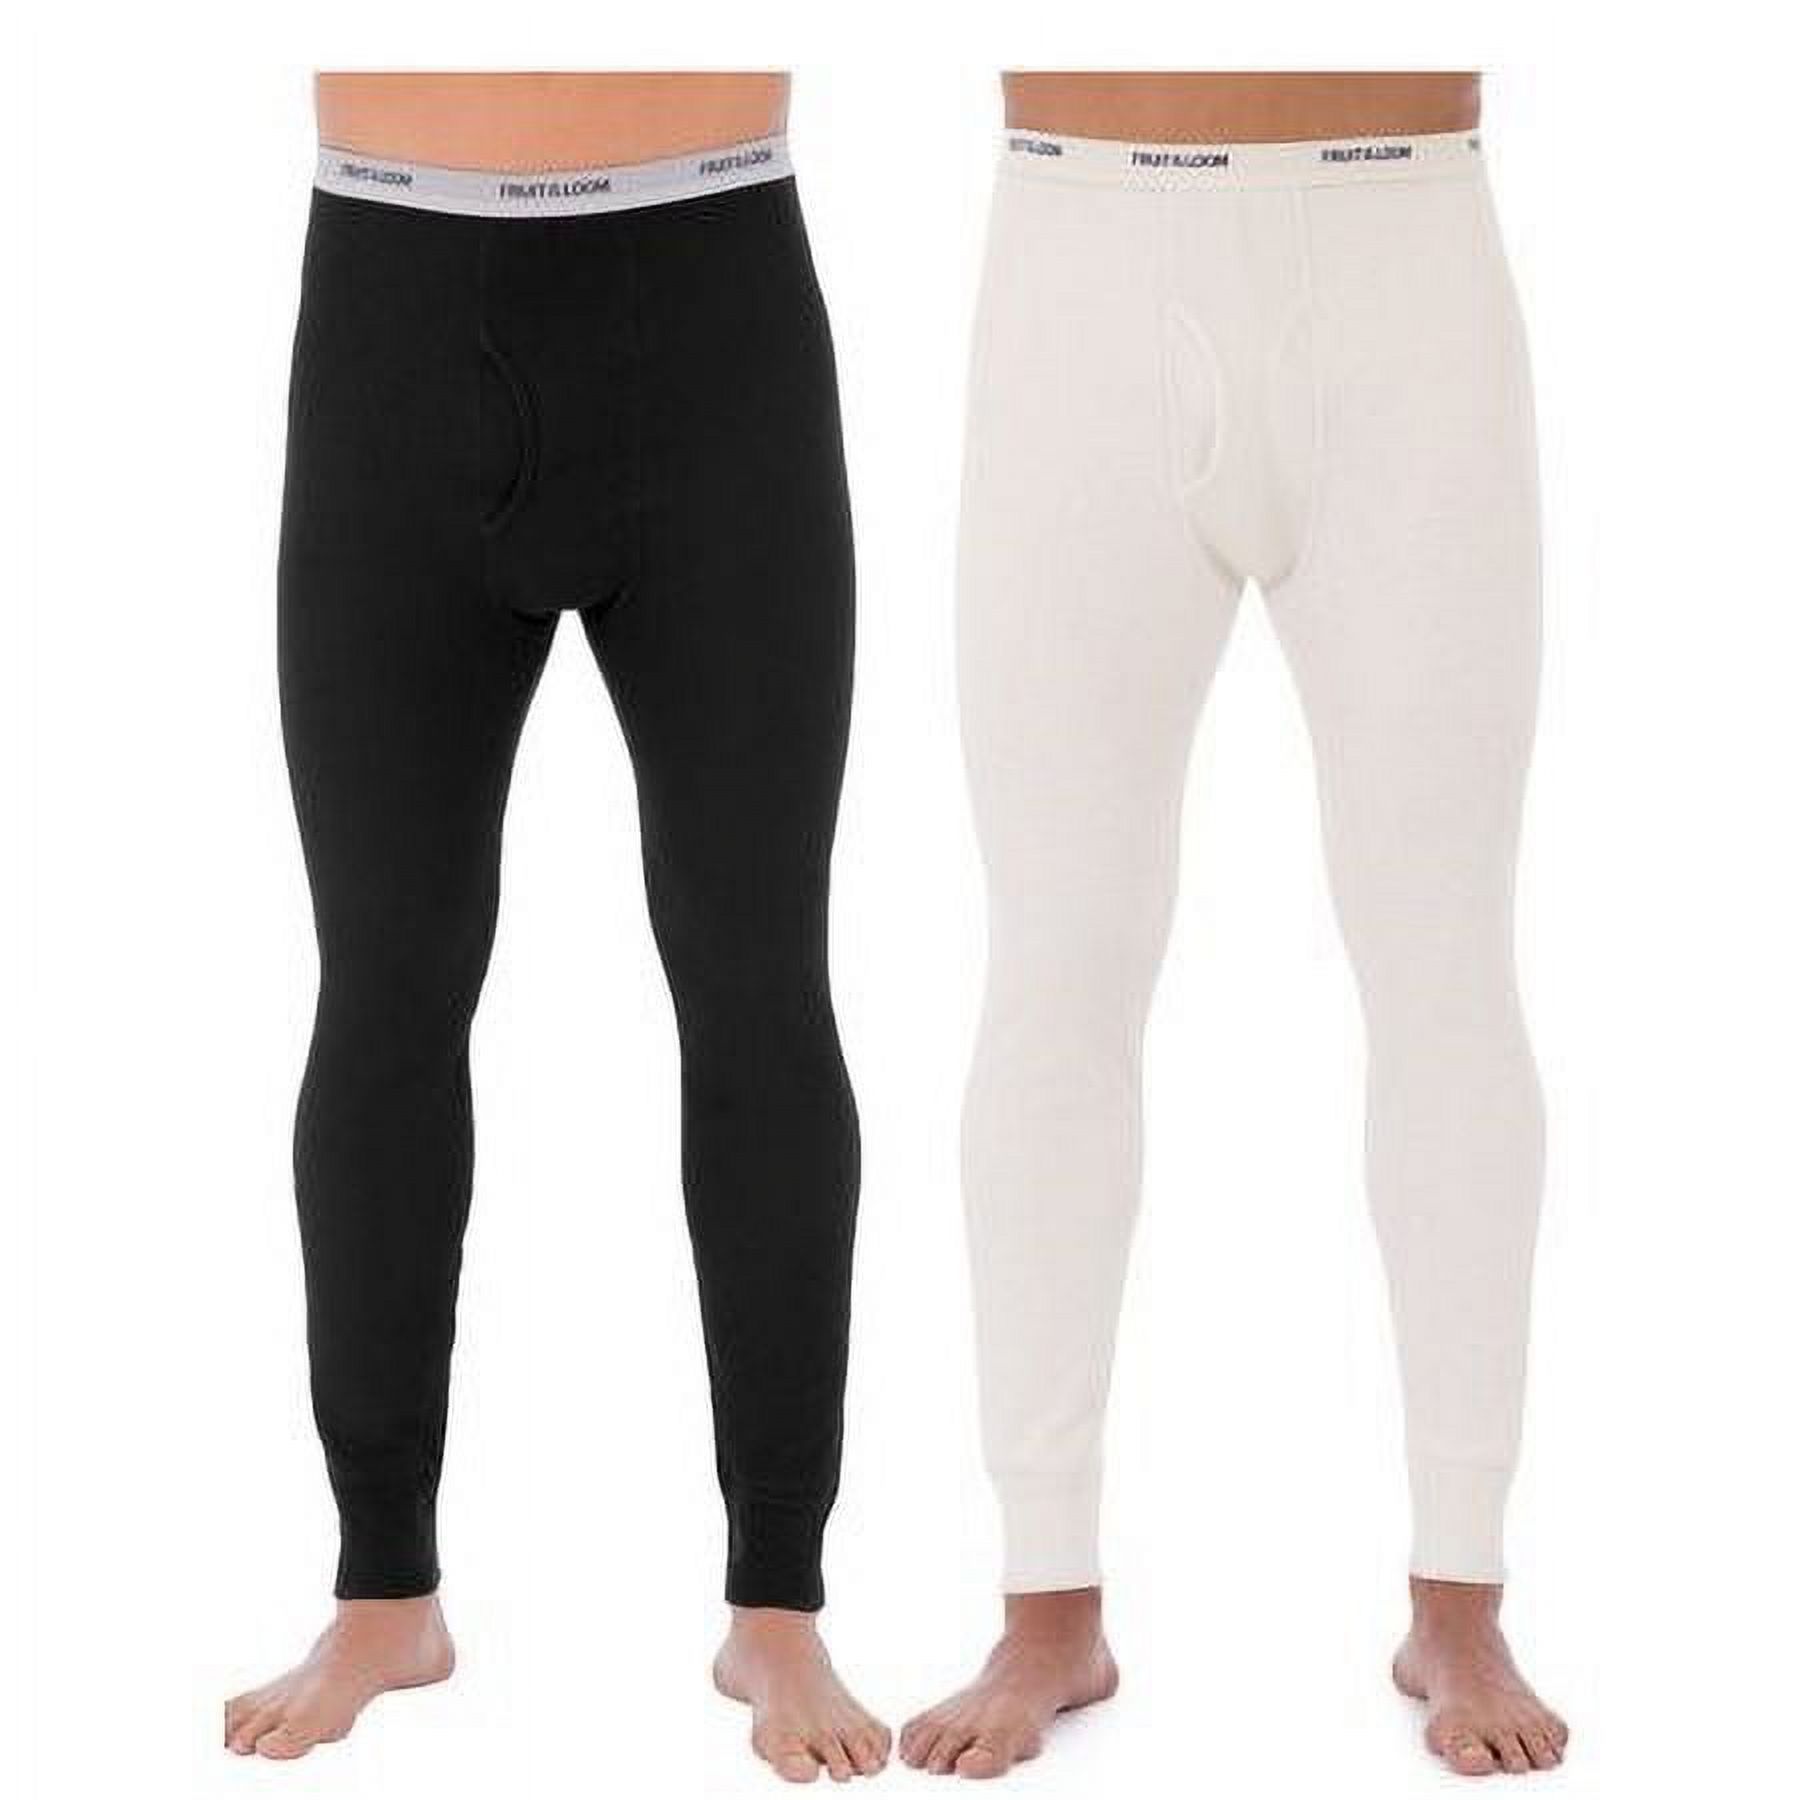 Fruit of the Loom Men's Classic Bottoms Thermal Underwear for Men, Value 2 Pack (2 pants) - image 3 of 4